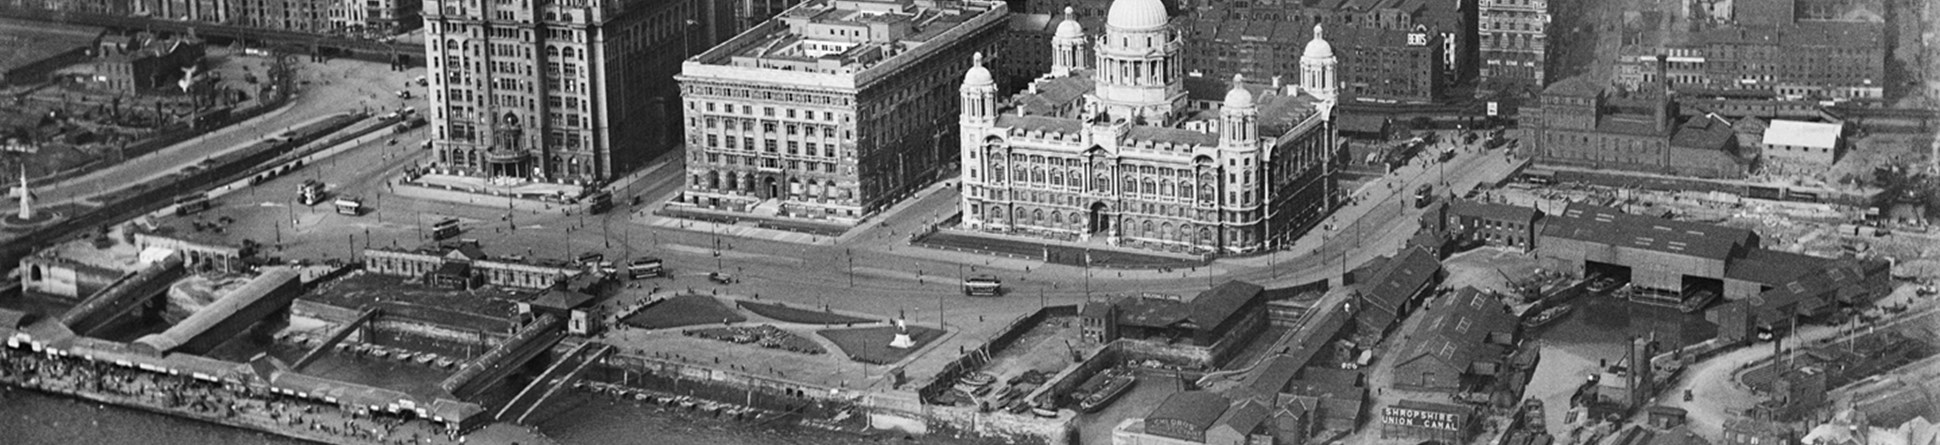 Archive aerial photograph looking across the River Mersey